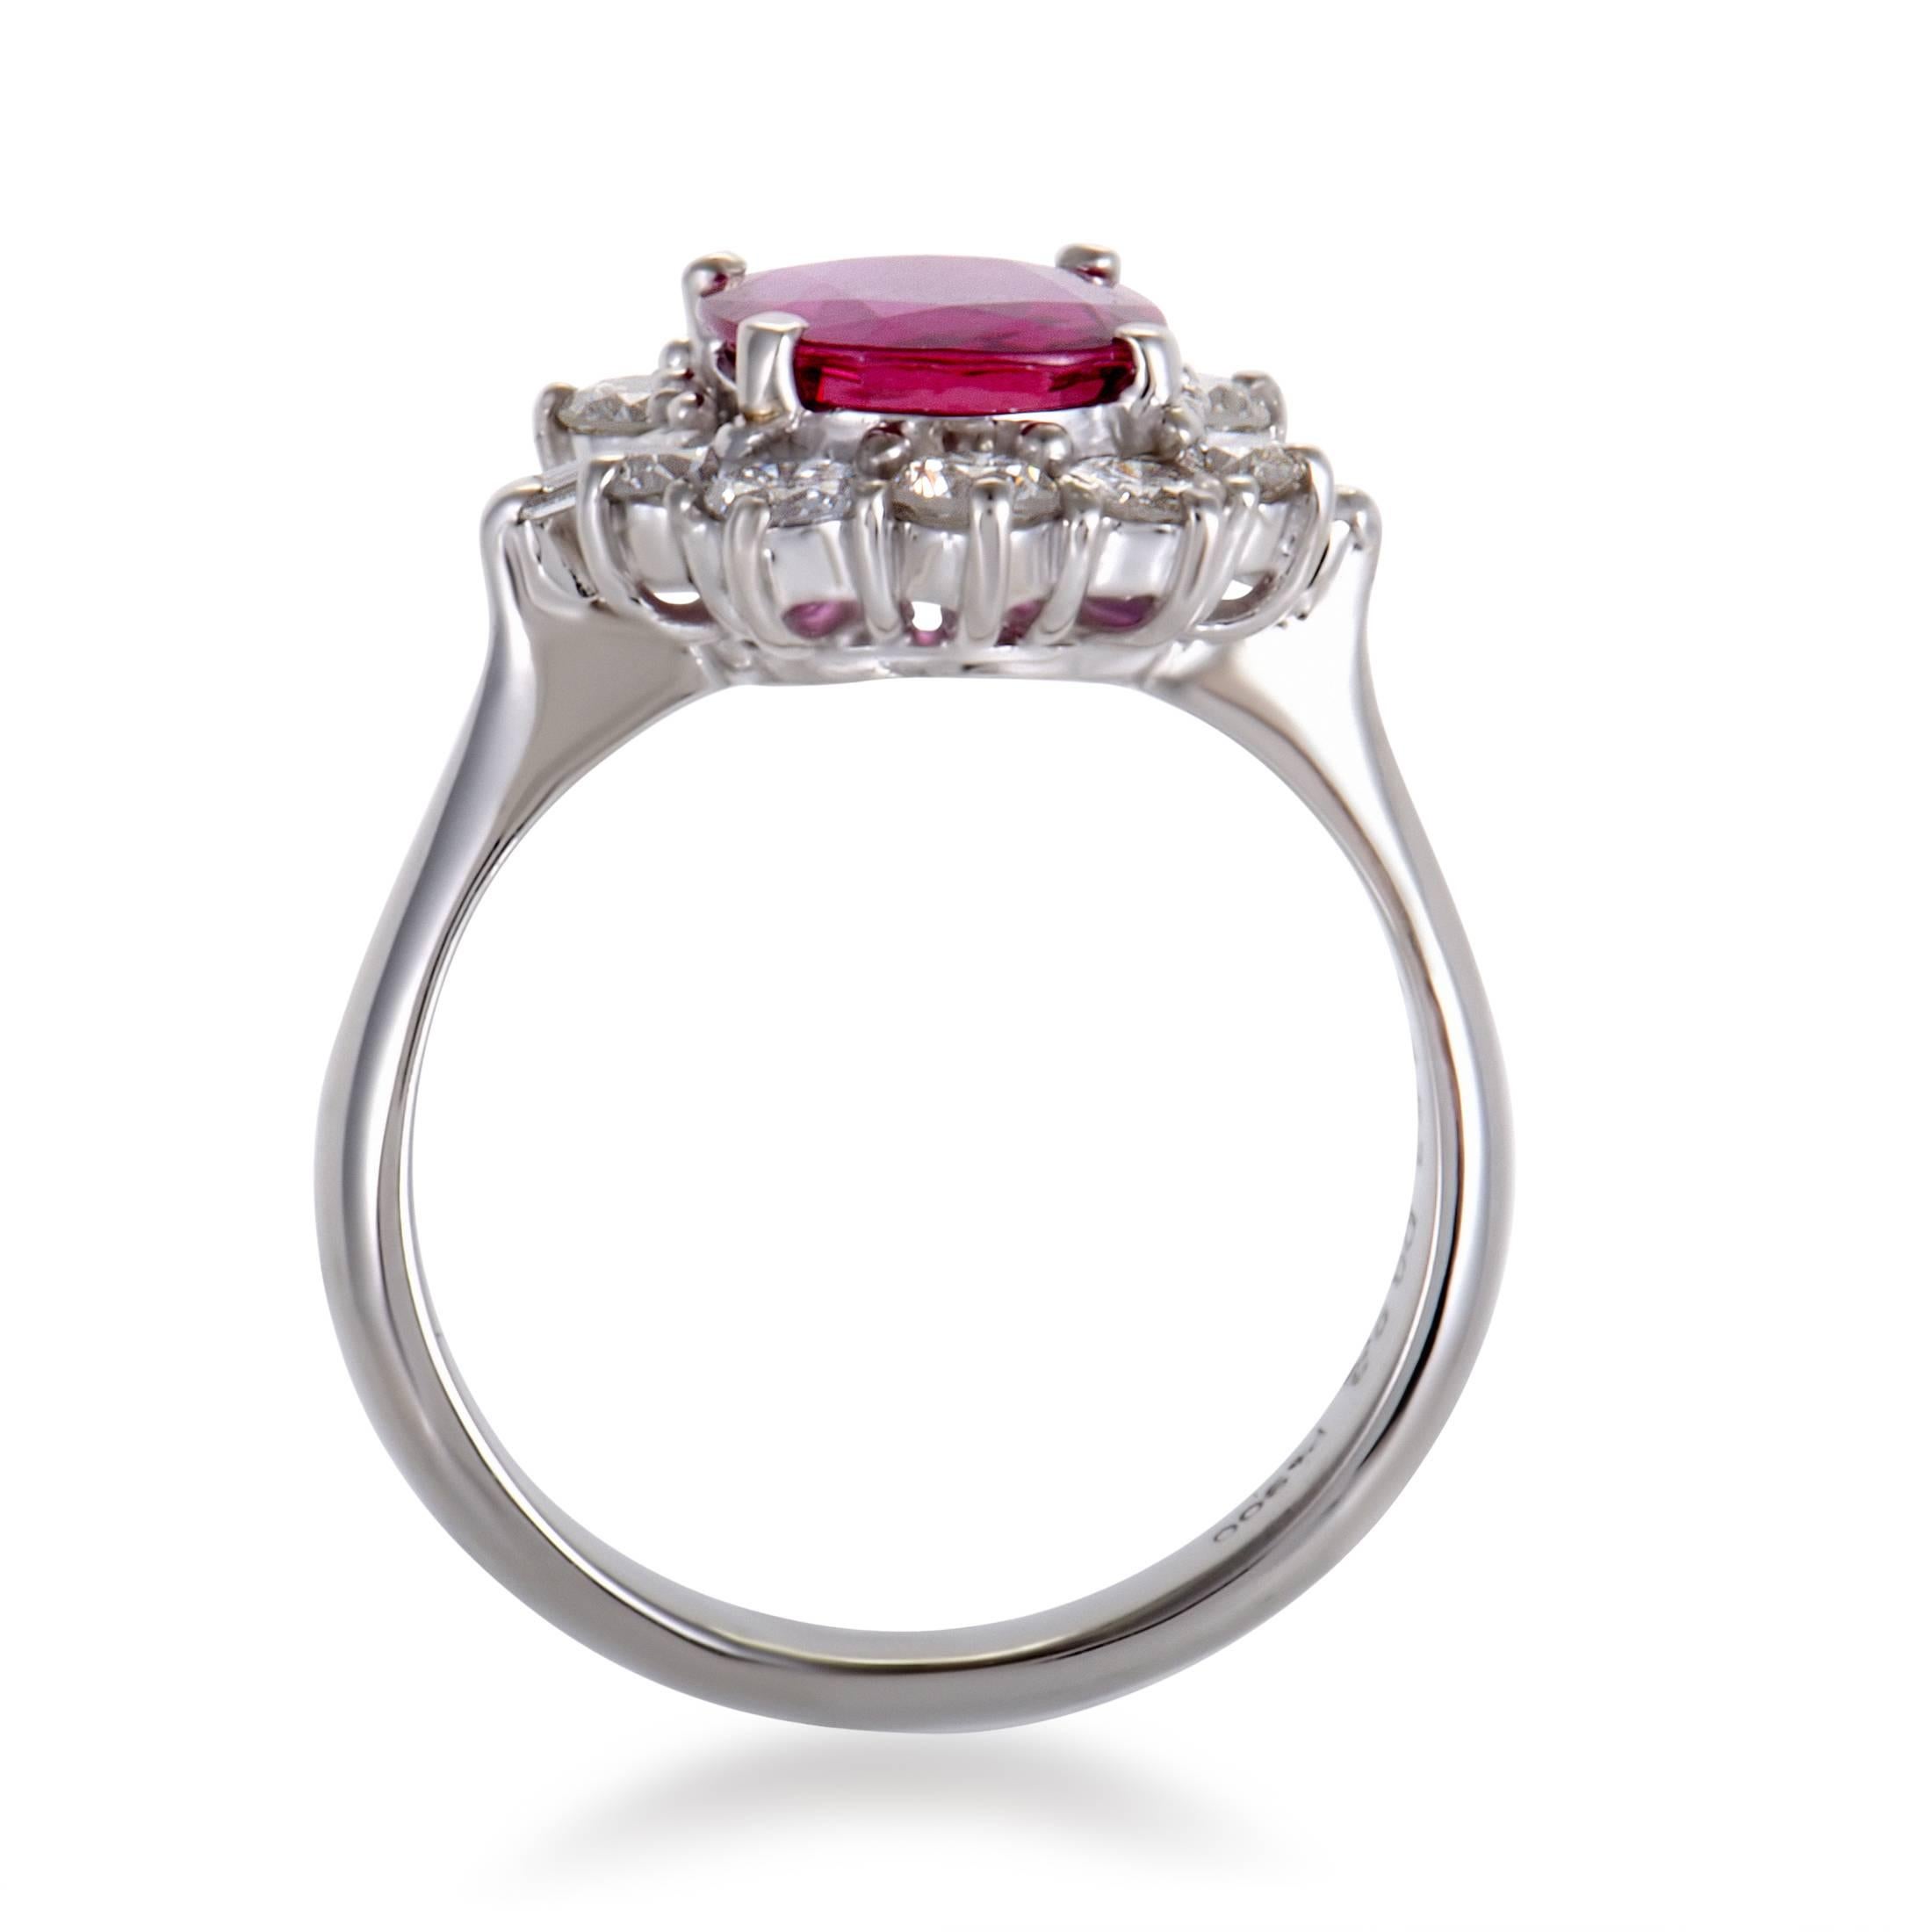 Brilliantly complemented by the wonderfully bright backdrop of splendid platinum and sparkling diamonds amounting to 0.93ct, the astonishing ruby weighing 1.45 carats produces majestic allure in thus aesthetically sublime ring.
Ring Top Dimensions: